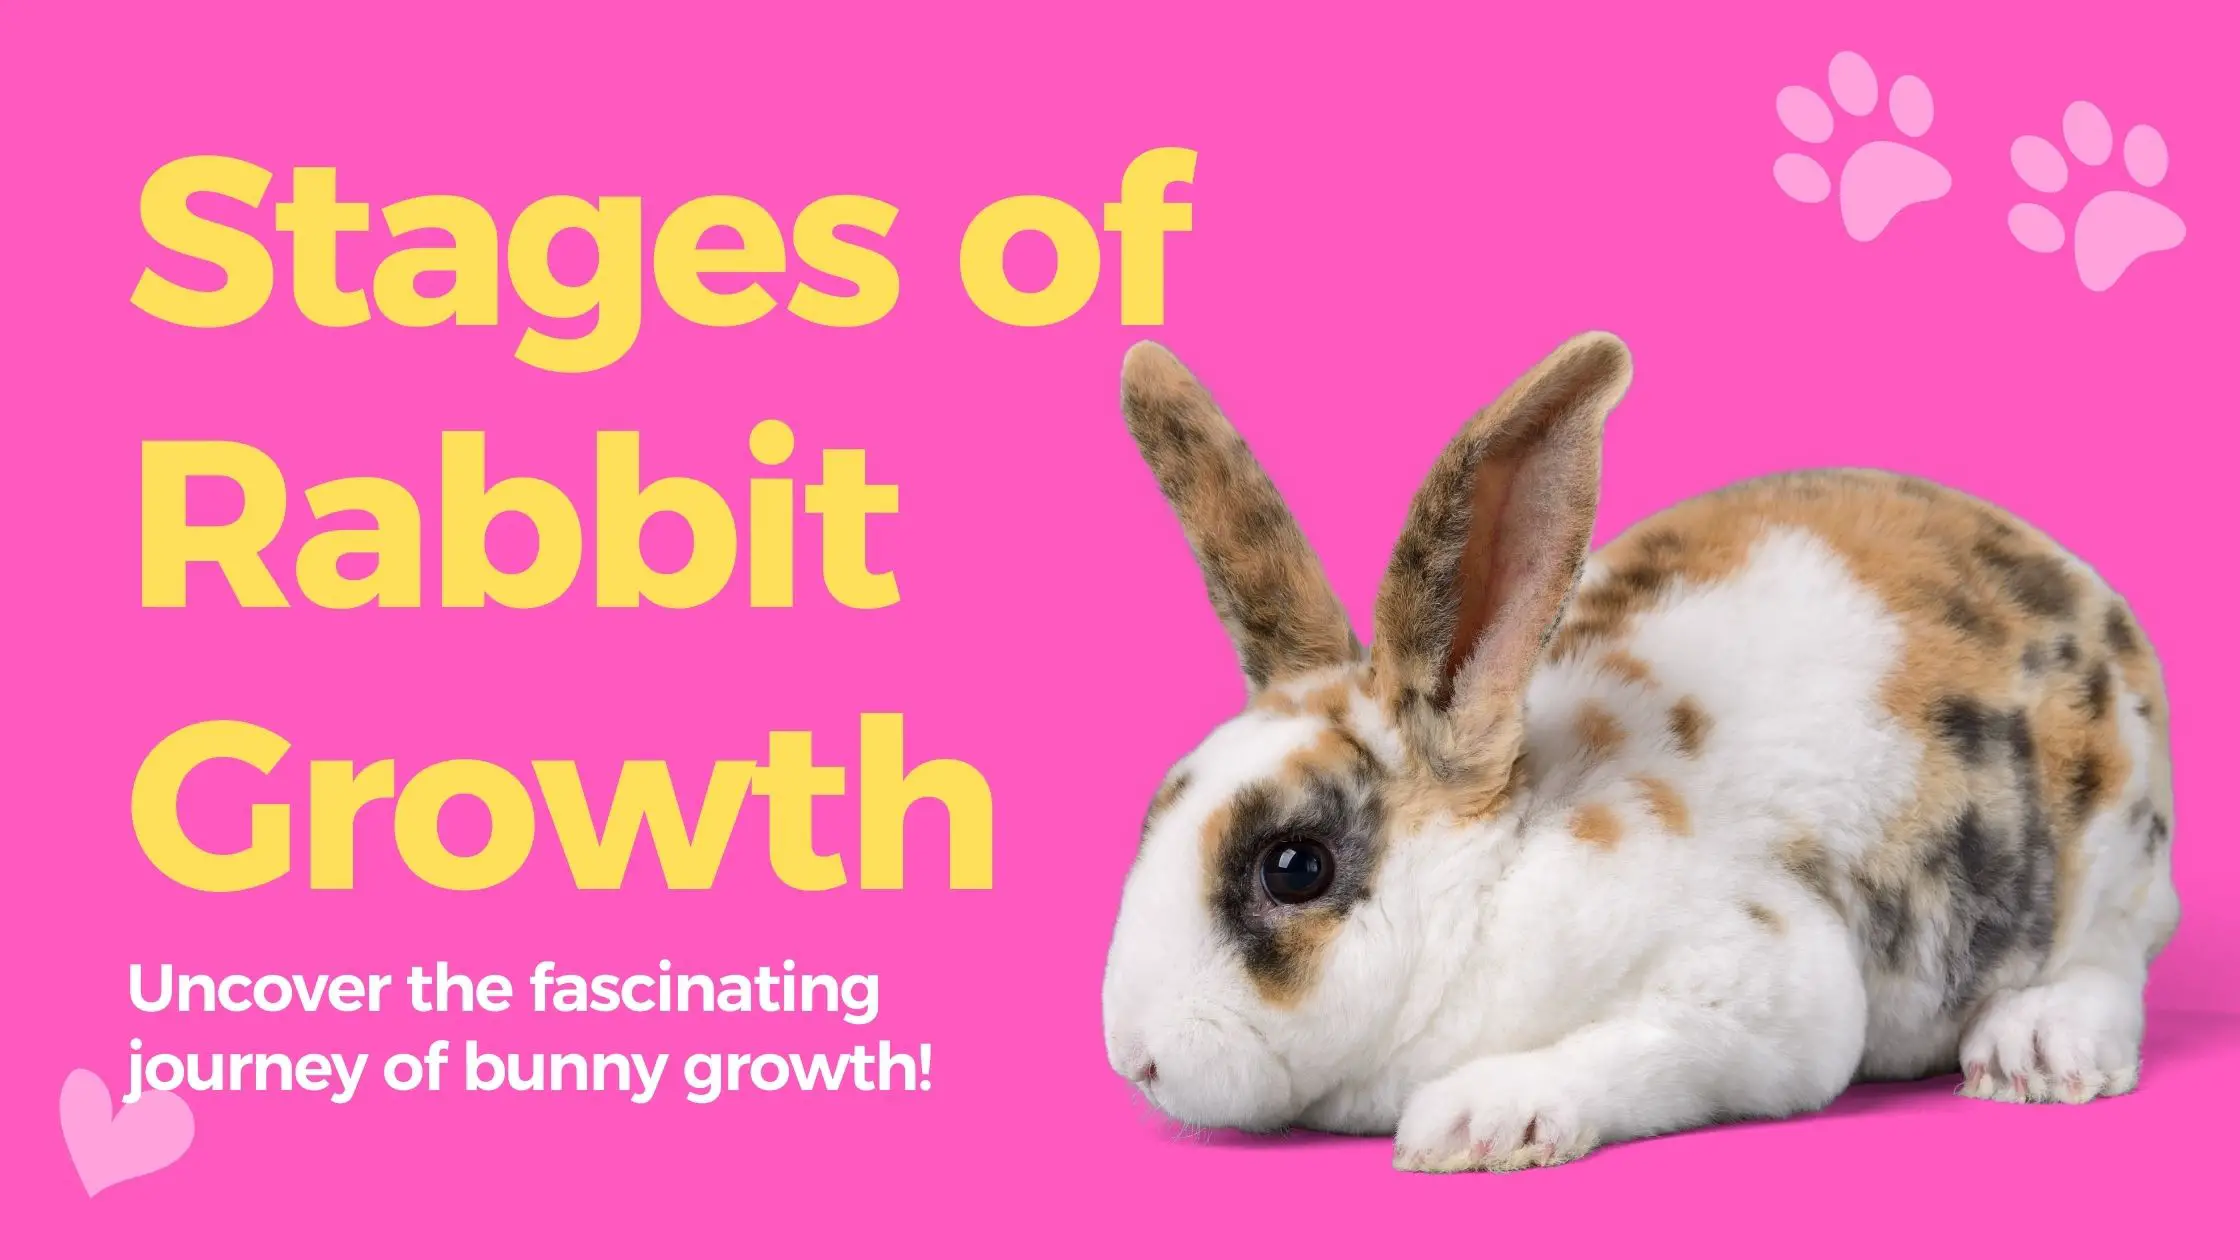 Stages of Rabbit Growth